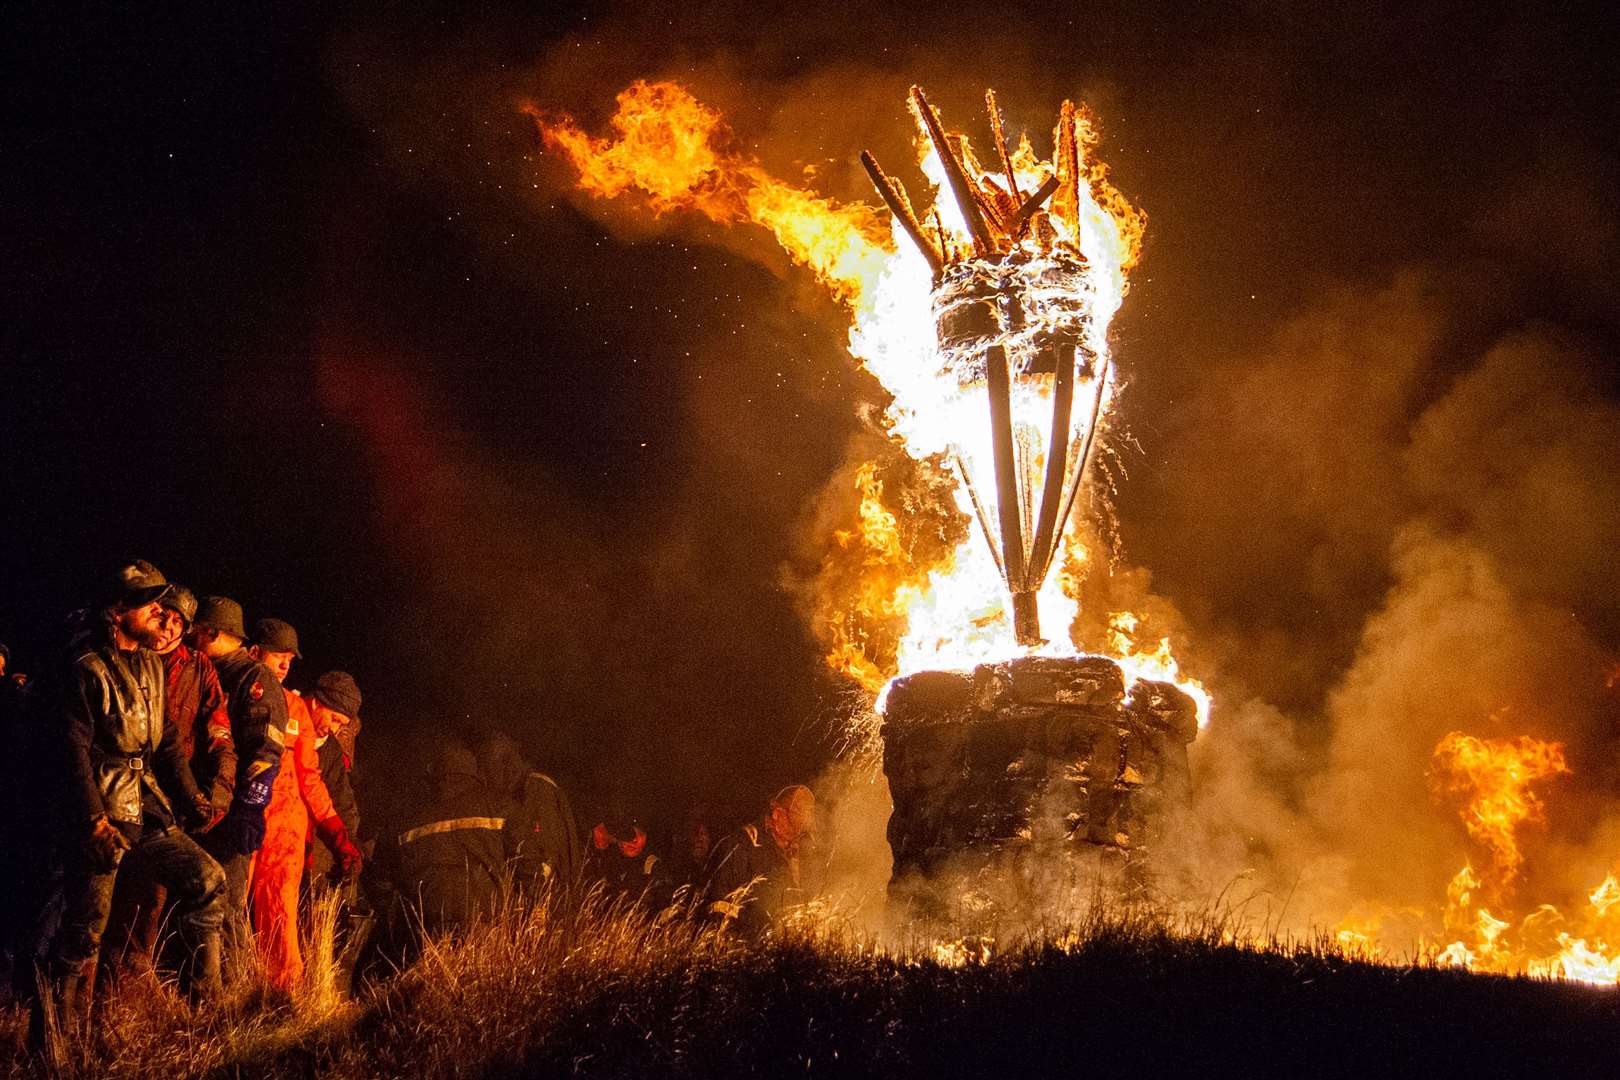 The Clavie burns upon Doorie Hill. The village of Burghead welcomes in the 2020 New Year on January 11, 2020 with their traditional Burning of the Clavie Celebration. Picture: Daniel Forsyth